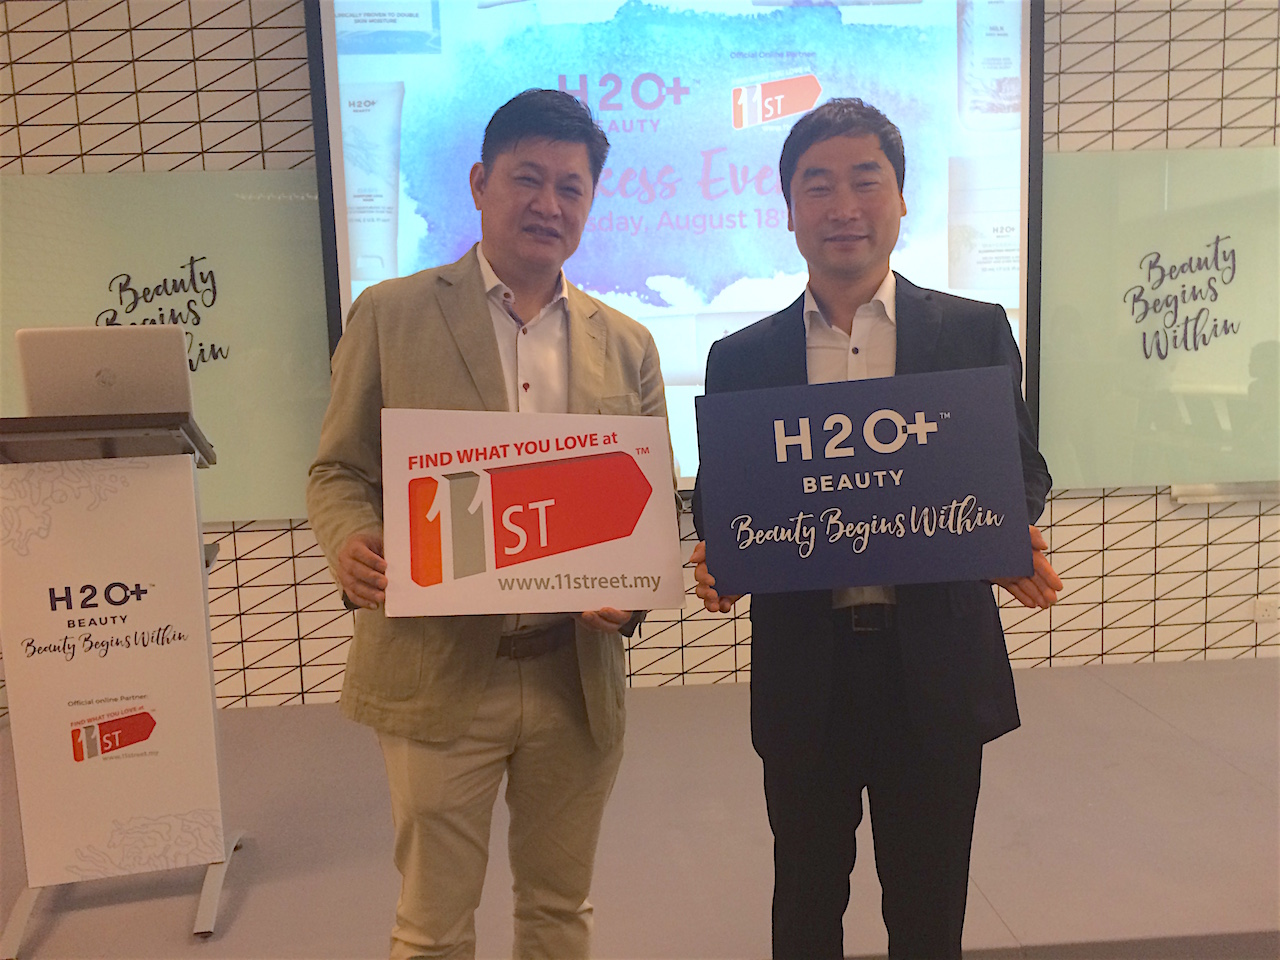 (left) Wong Meng Choy, CEO of Luxor Beauty World Sdn Bhd, the sole distributor of H20+ in Malaysia, and Bruce Lim, Vice President of Merchandising, 11street at the launch event held at 11street office yesterday